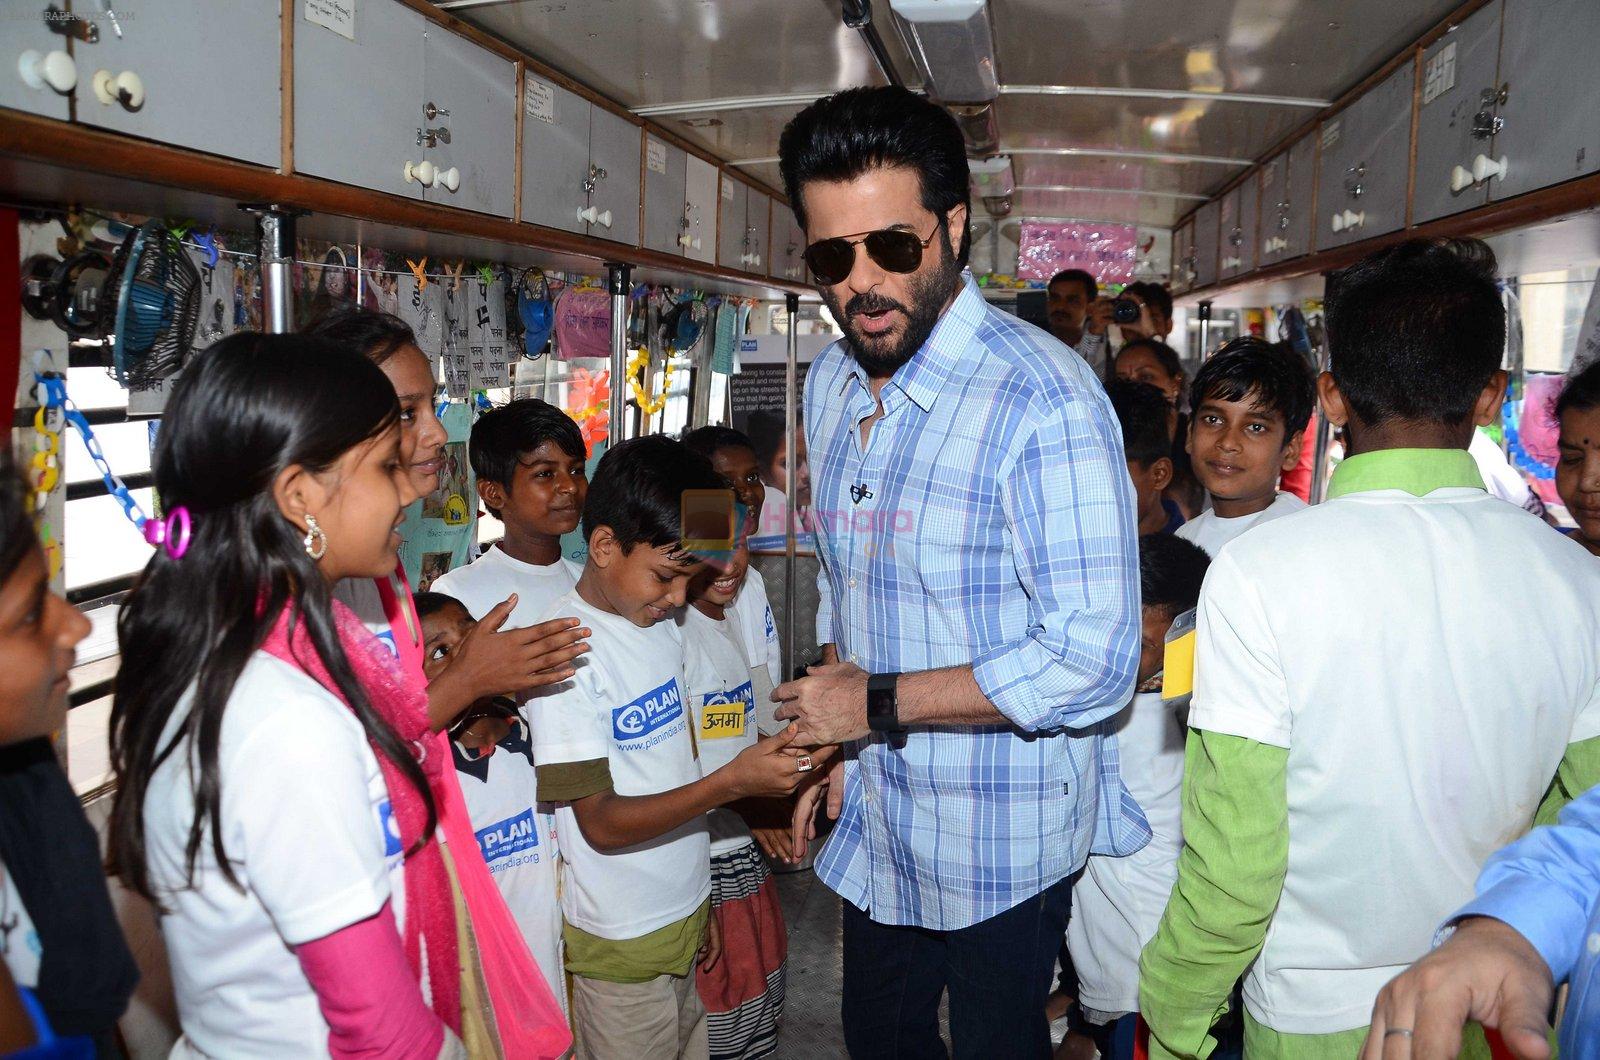 Anil Kapoor turns the spotlight on child labour as the ambassador of Plan India on 10th June 2016